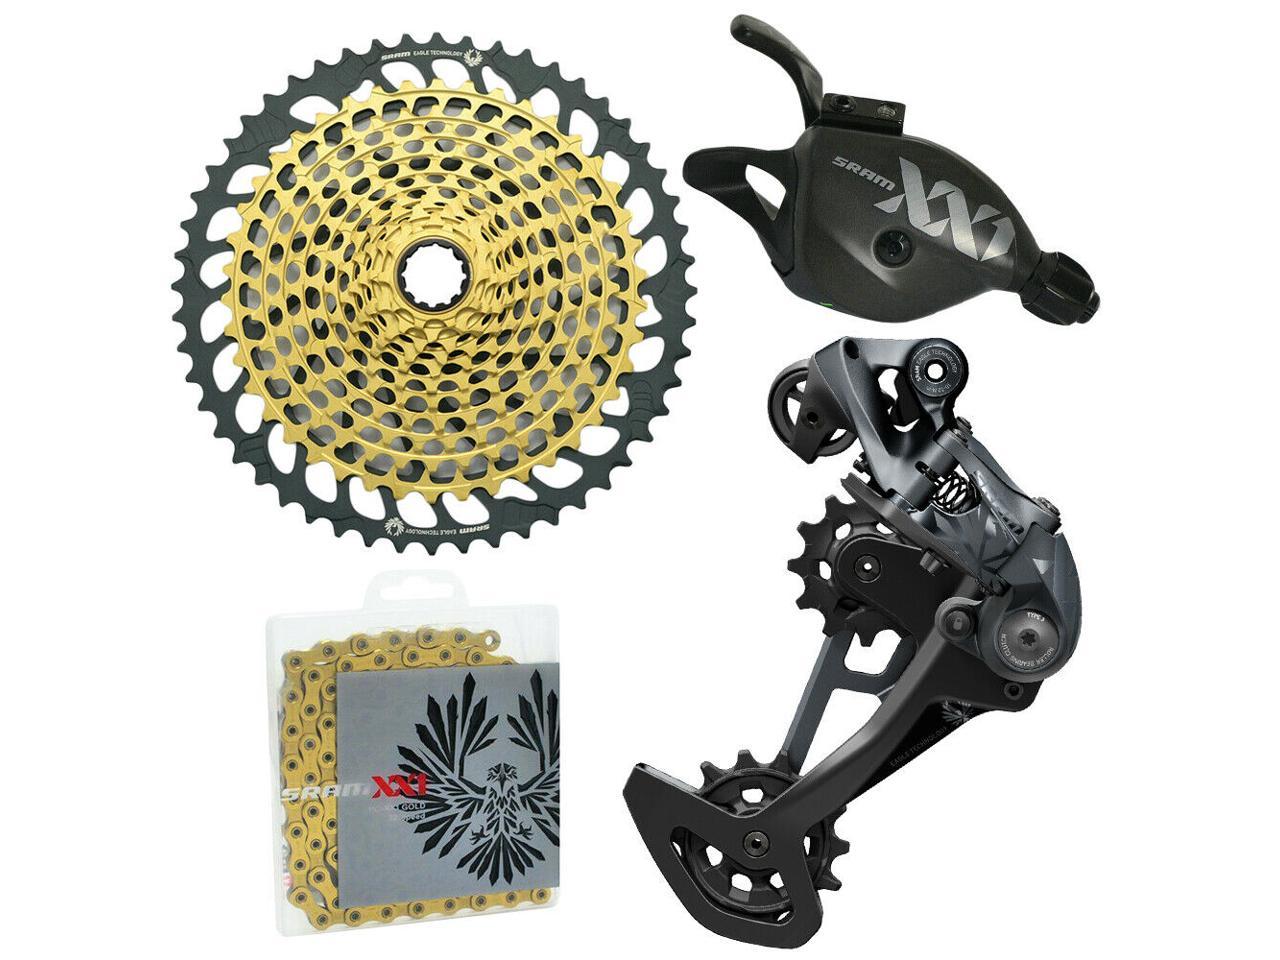 With Discrete Clamp Gold Sram XX1 Eagle Trigger 12 Speed Rear Shifter